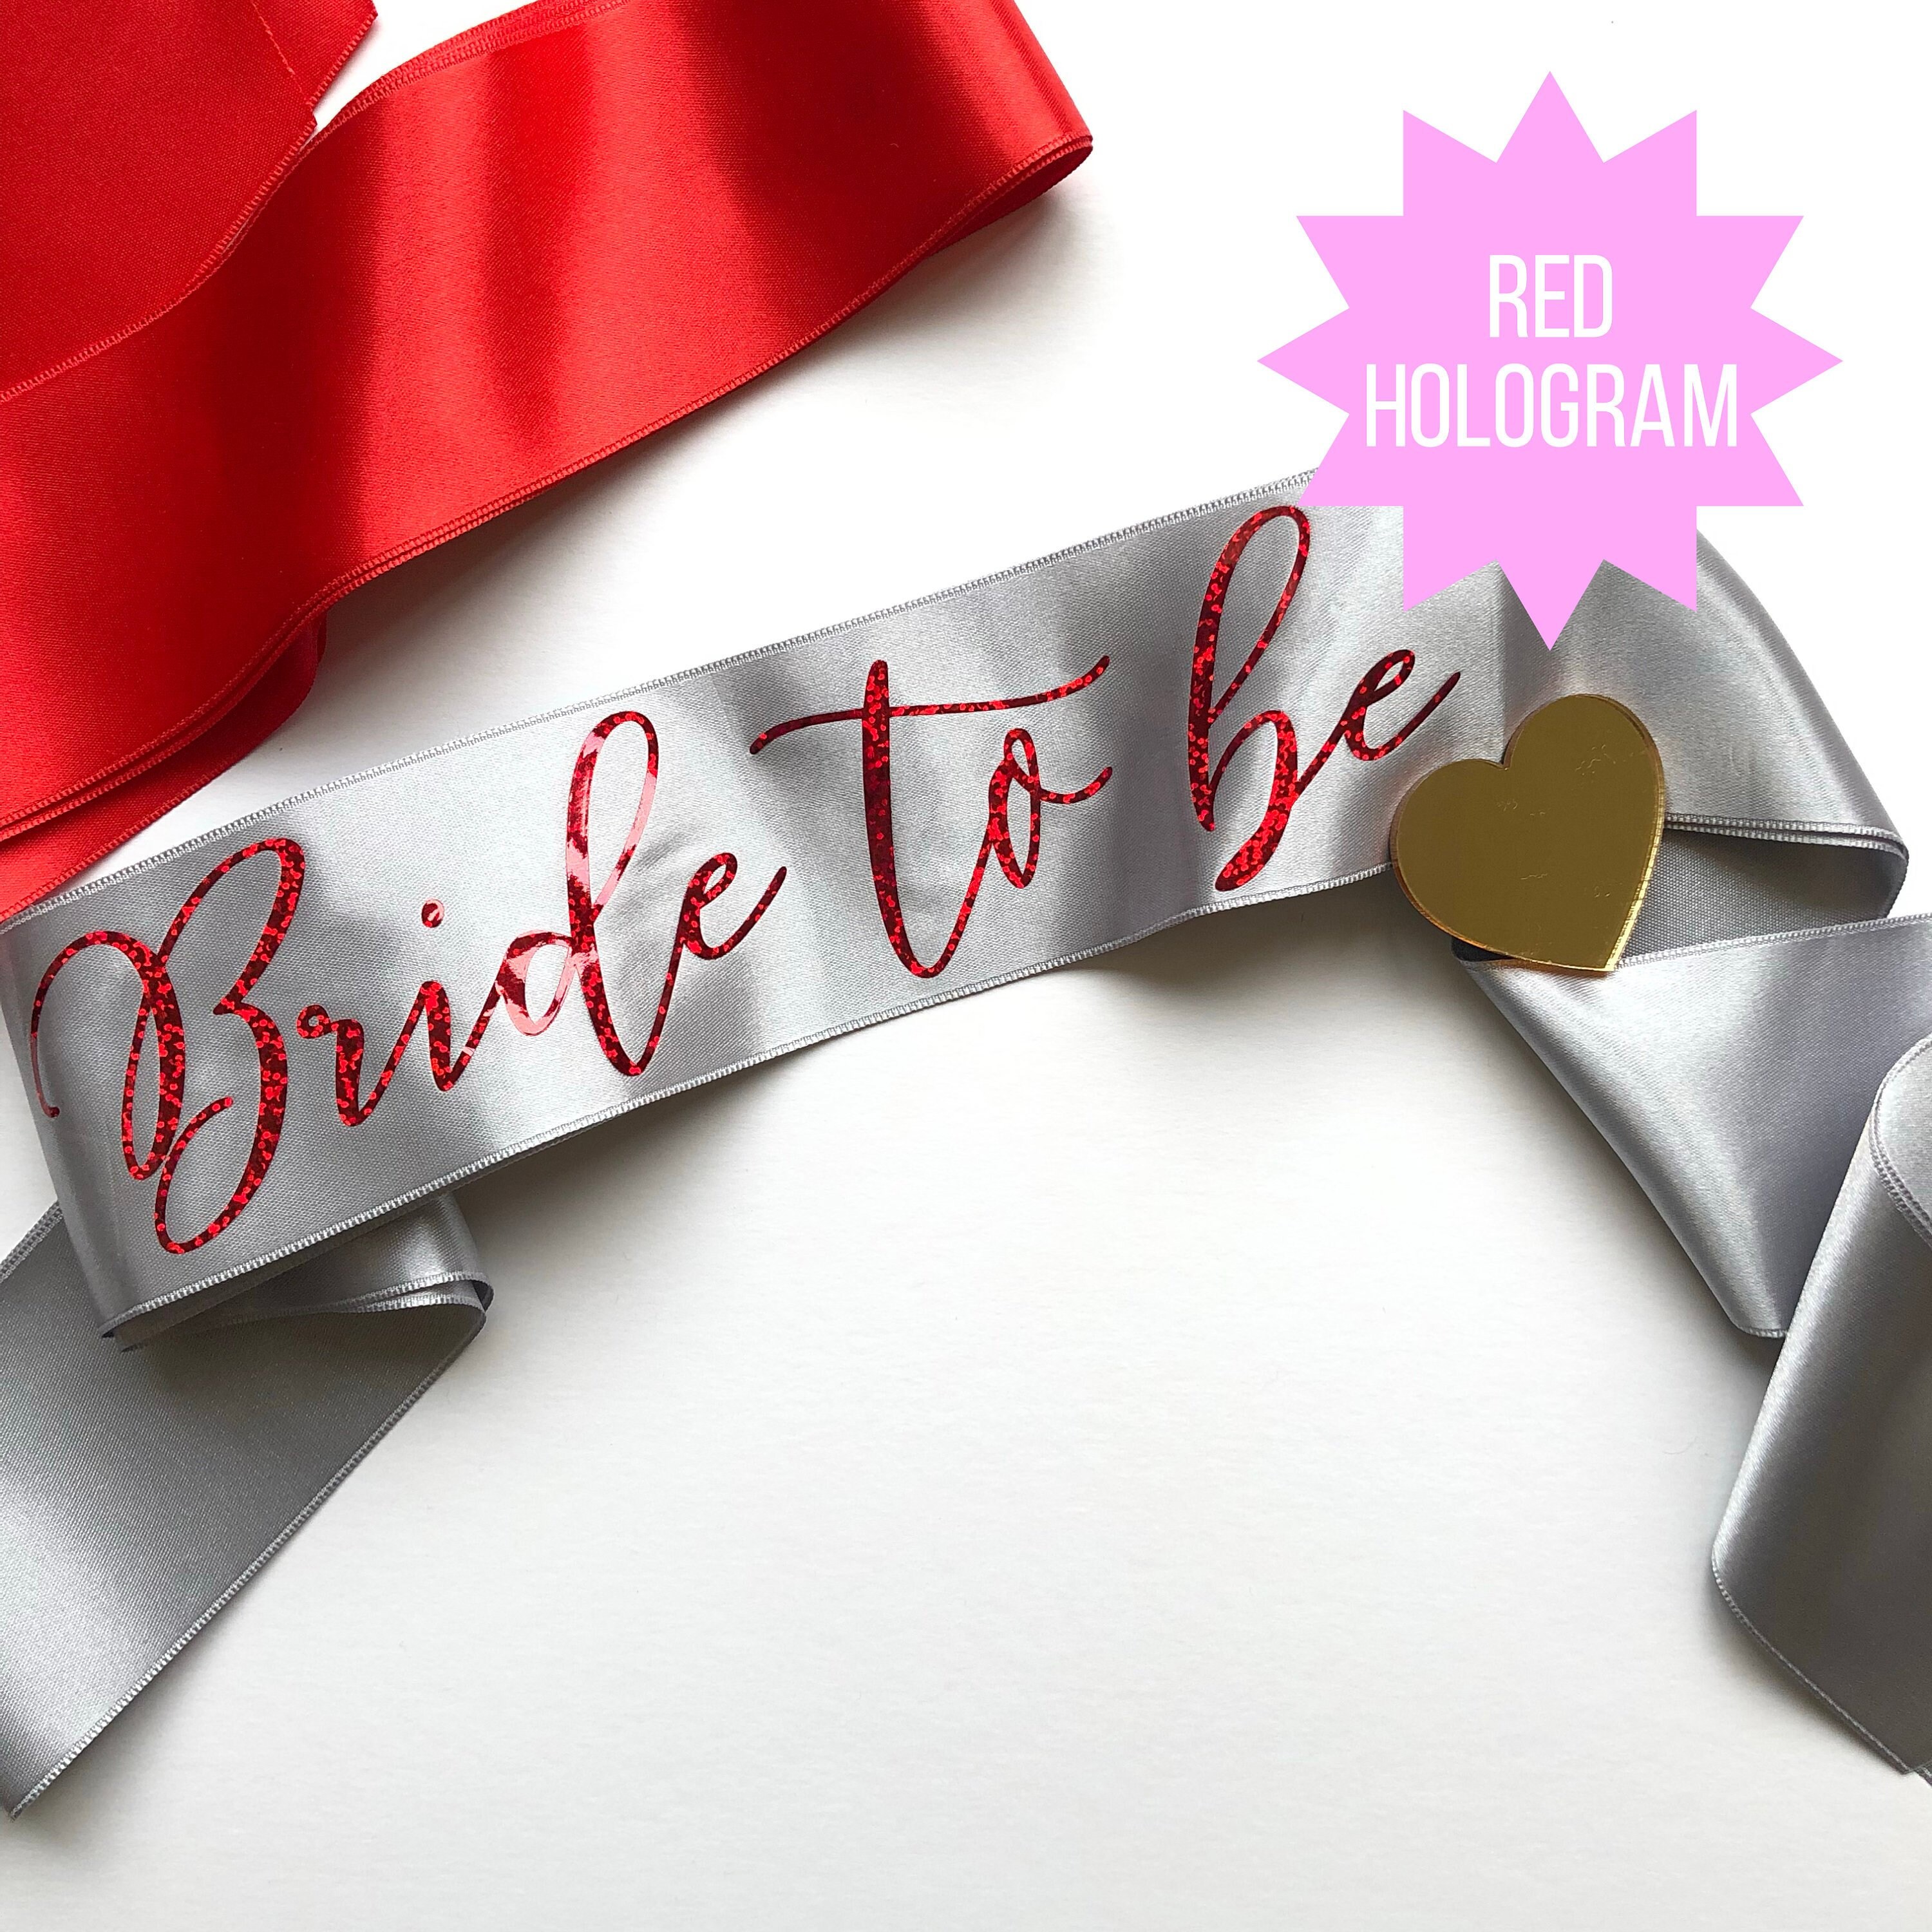 Just Married Sash - Choose Your Colour - High Quality Ribbon with Glitter Holographic Lettering